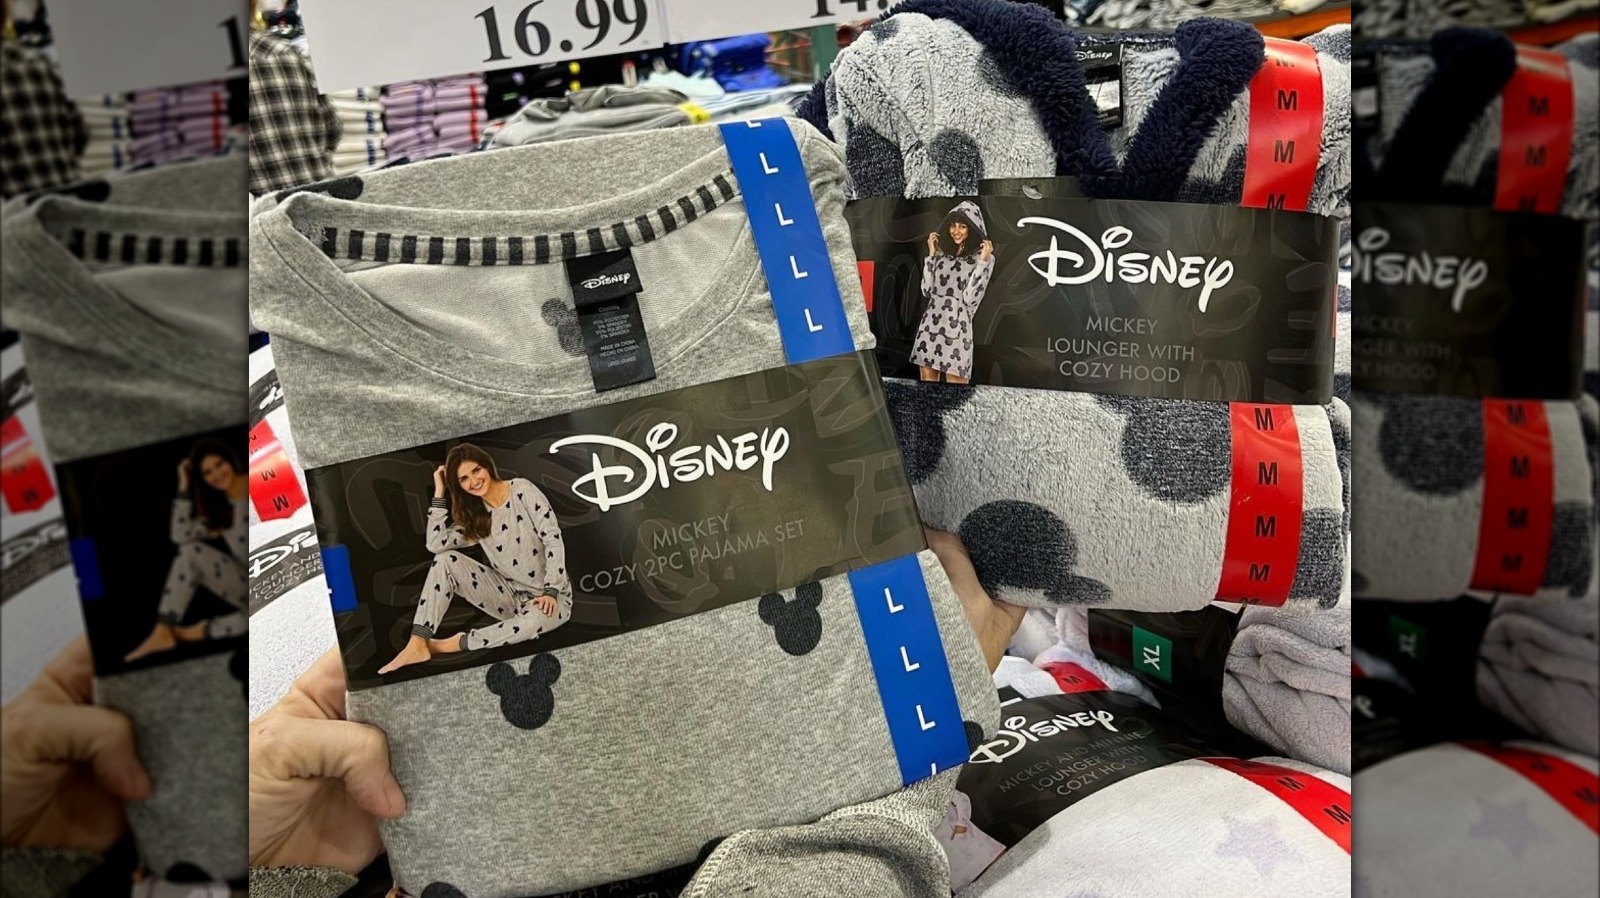 Costco Shoppers Are Freaking Out Over These Disney Pajama Sets